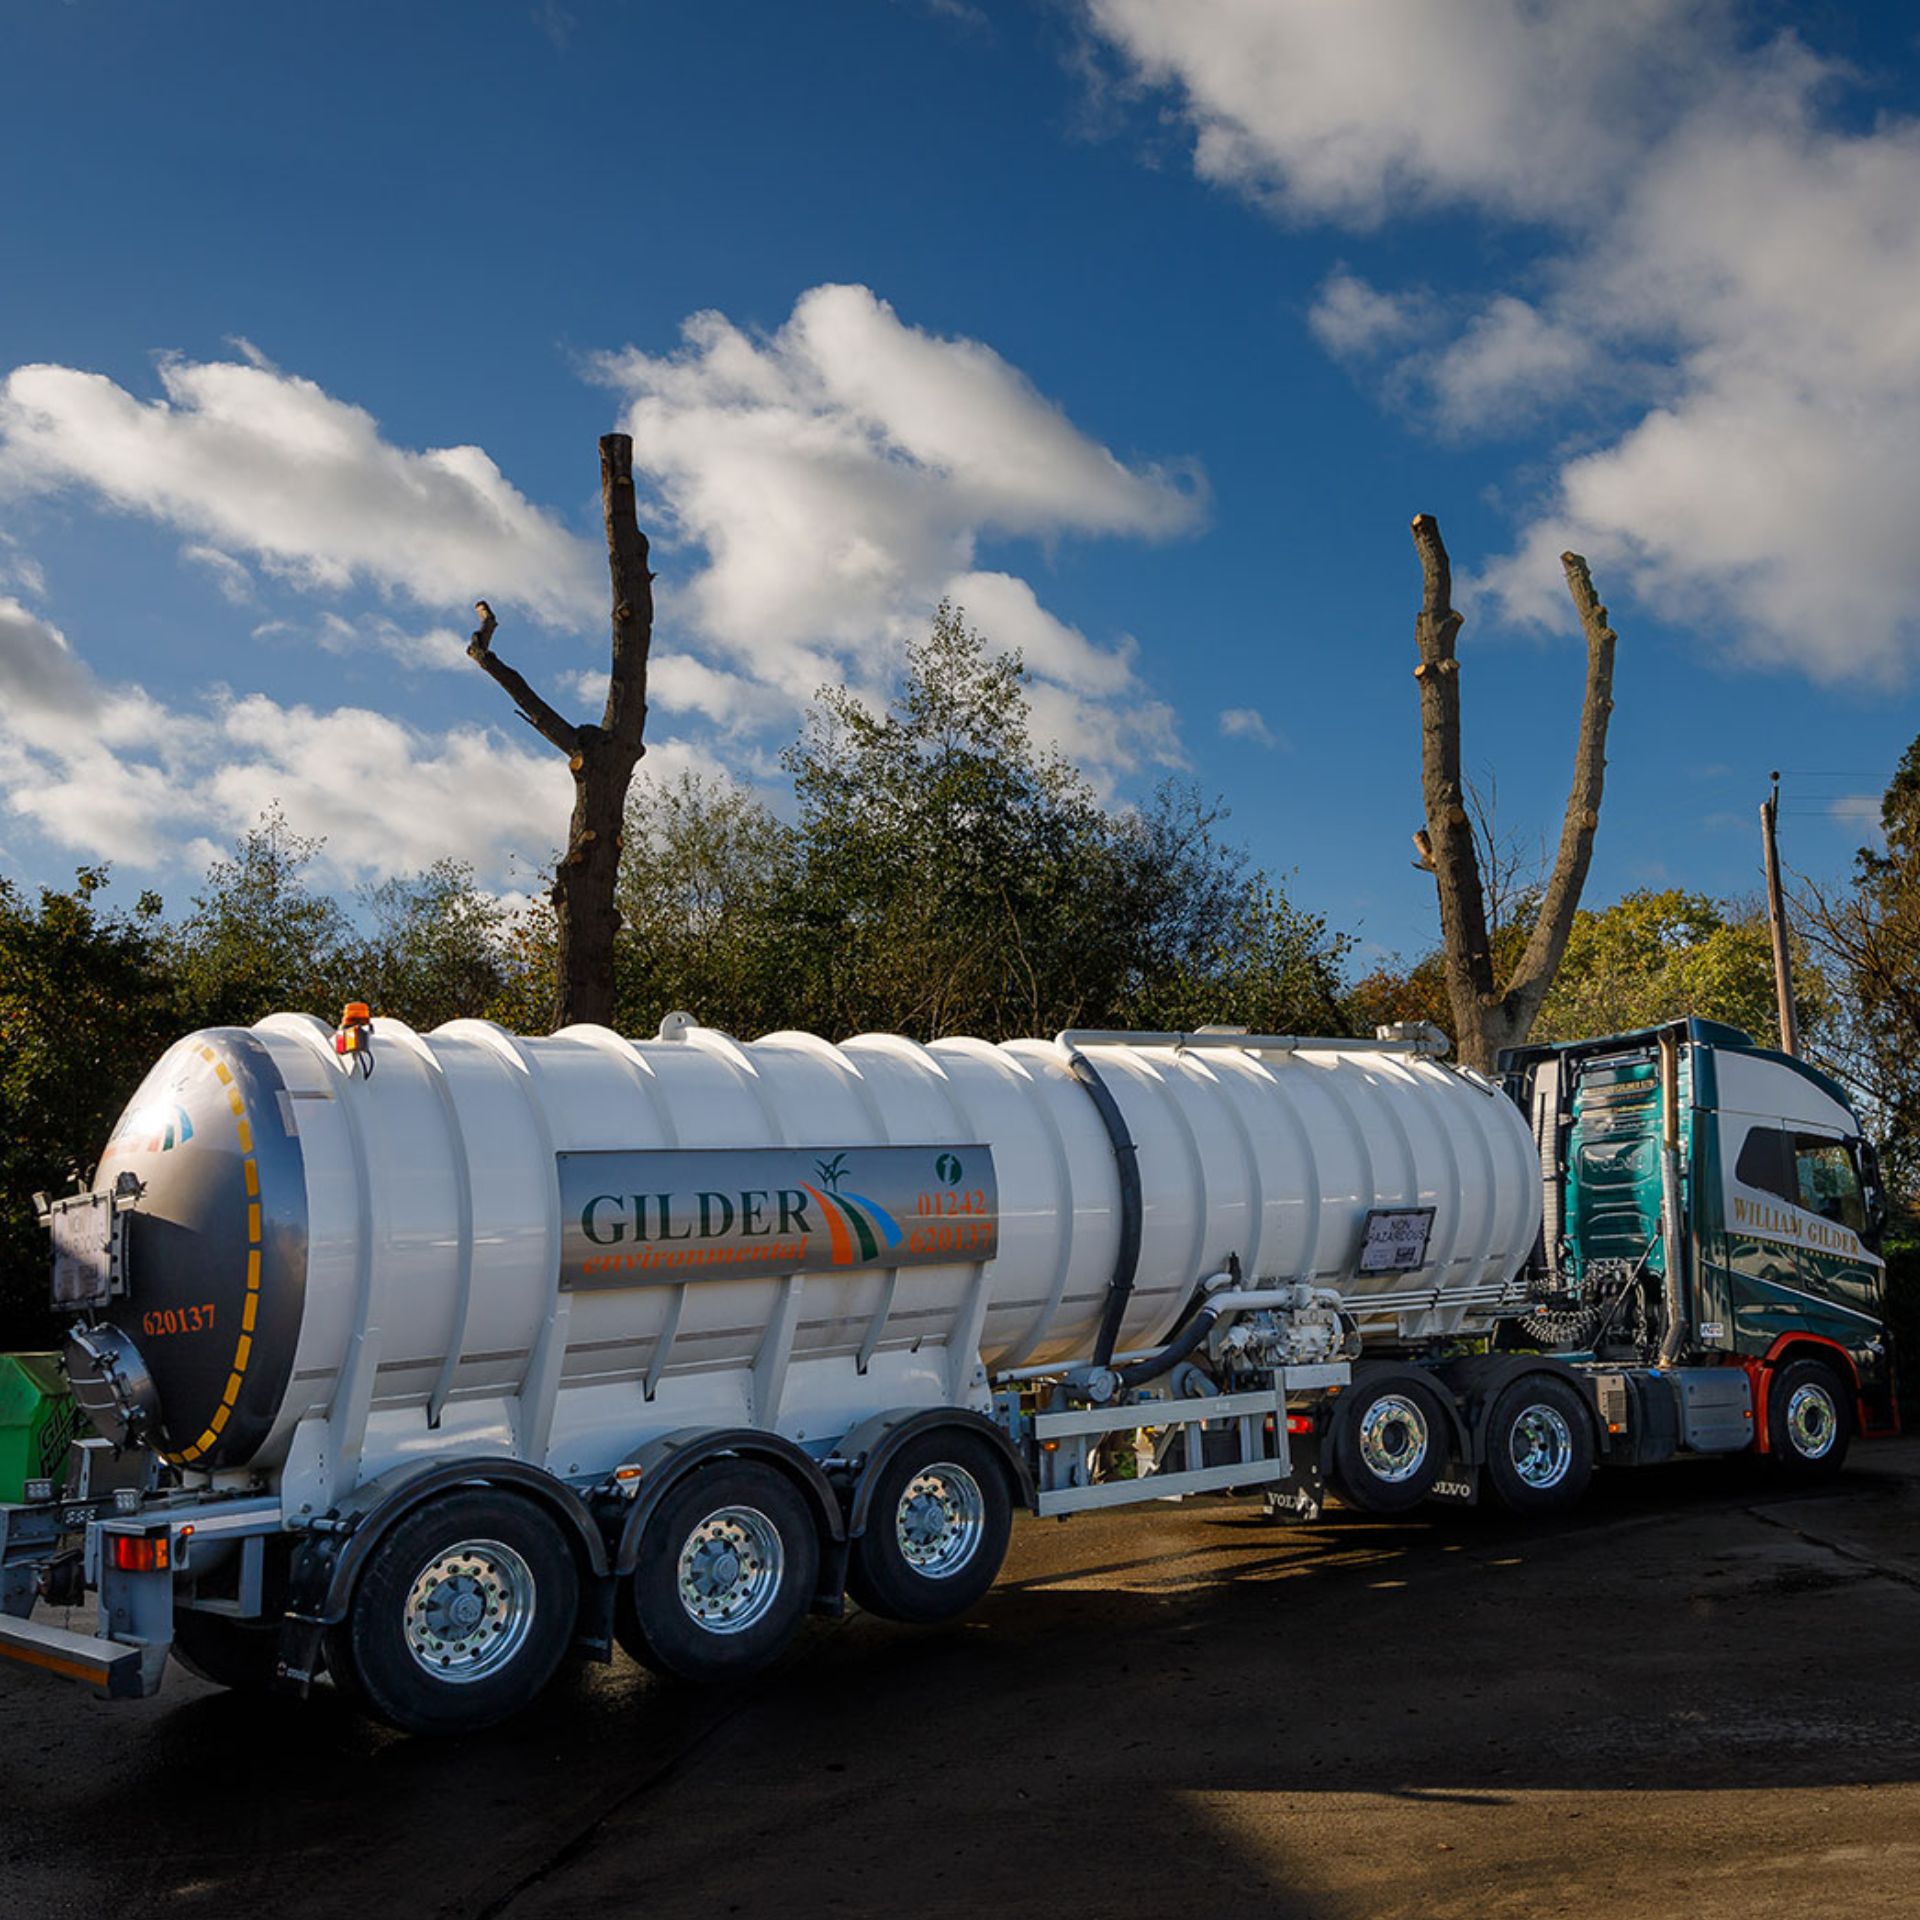 Wide view of a William Gilder Group tanker lorry on a sunny day